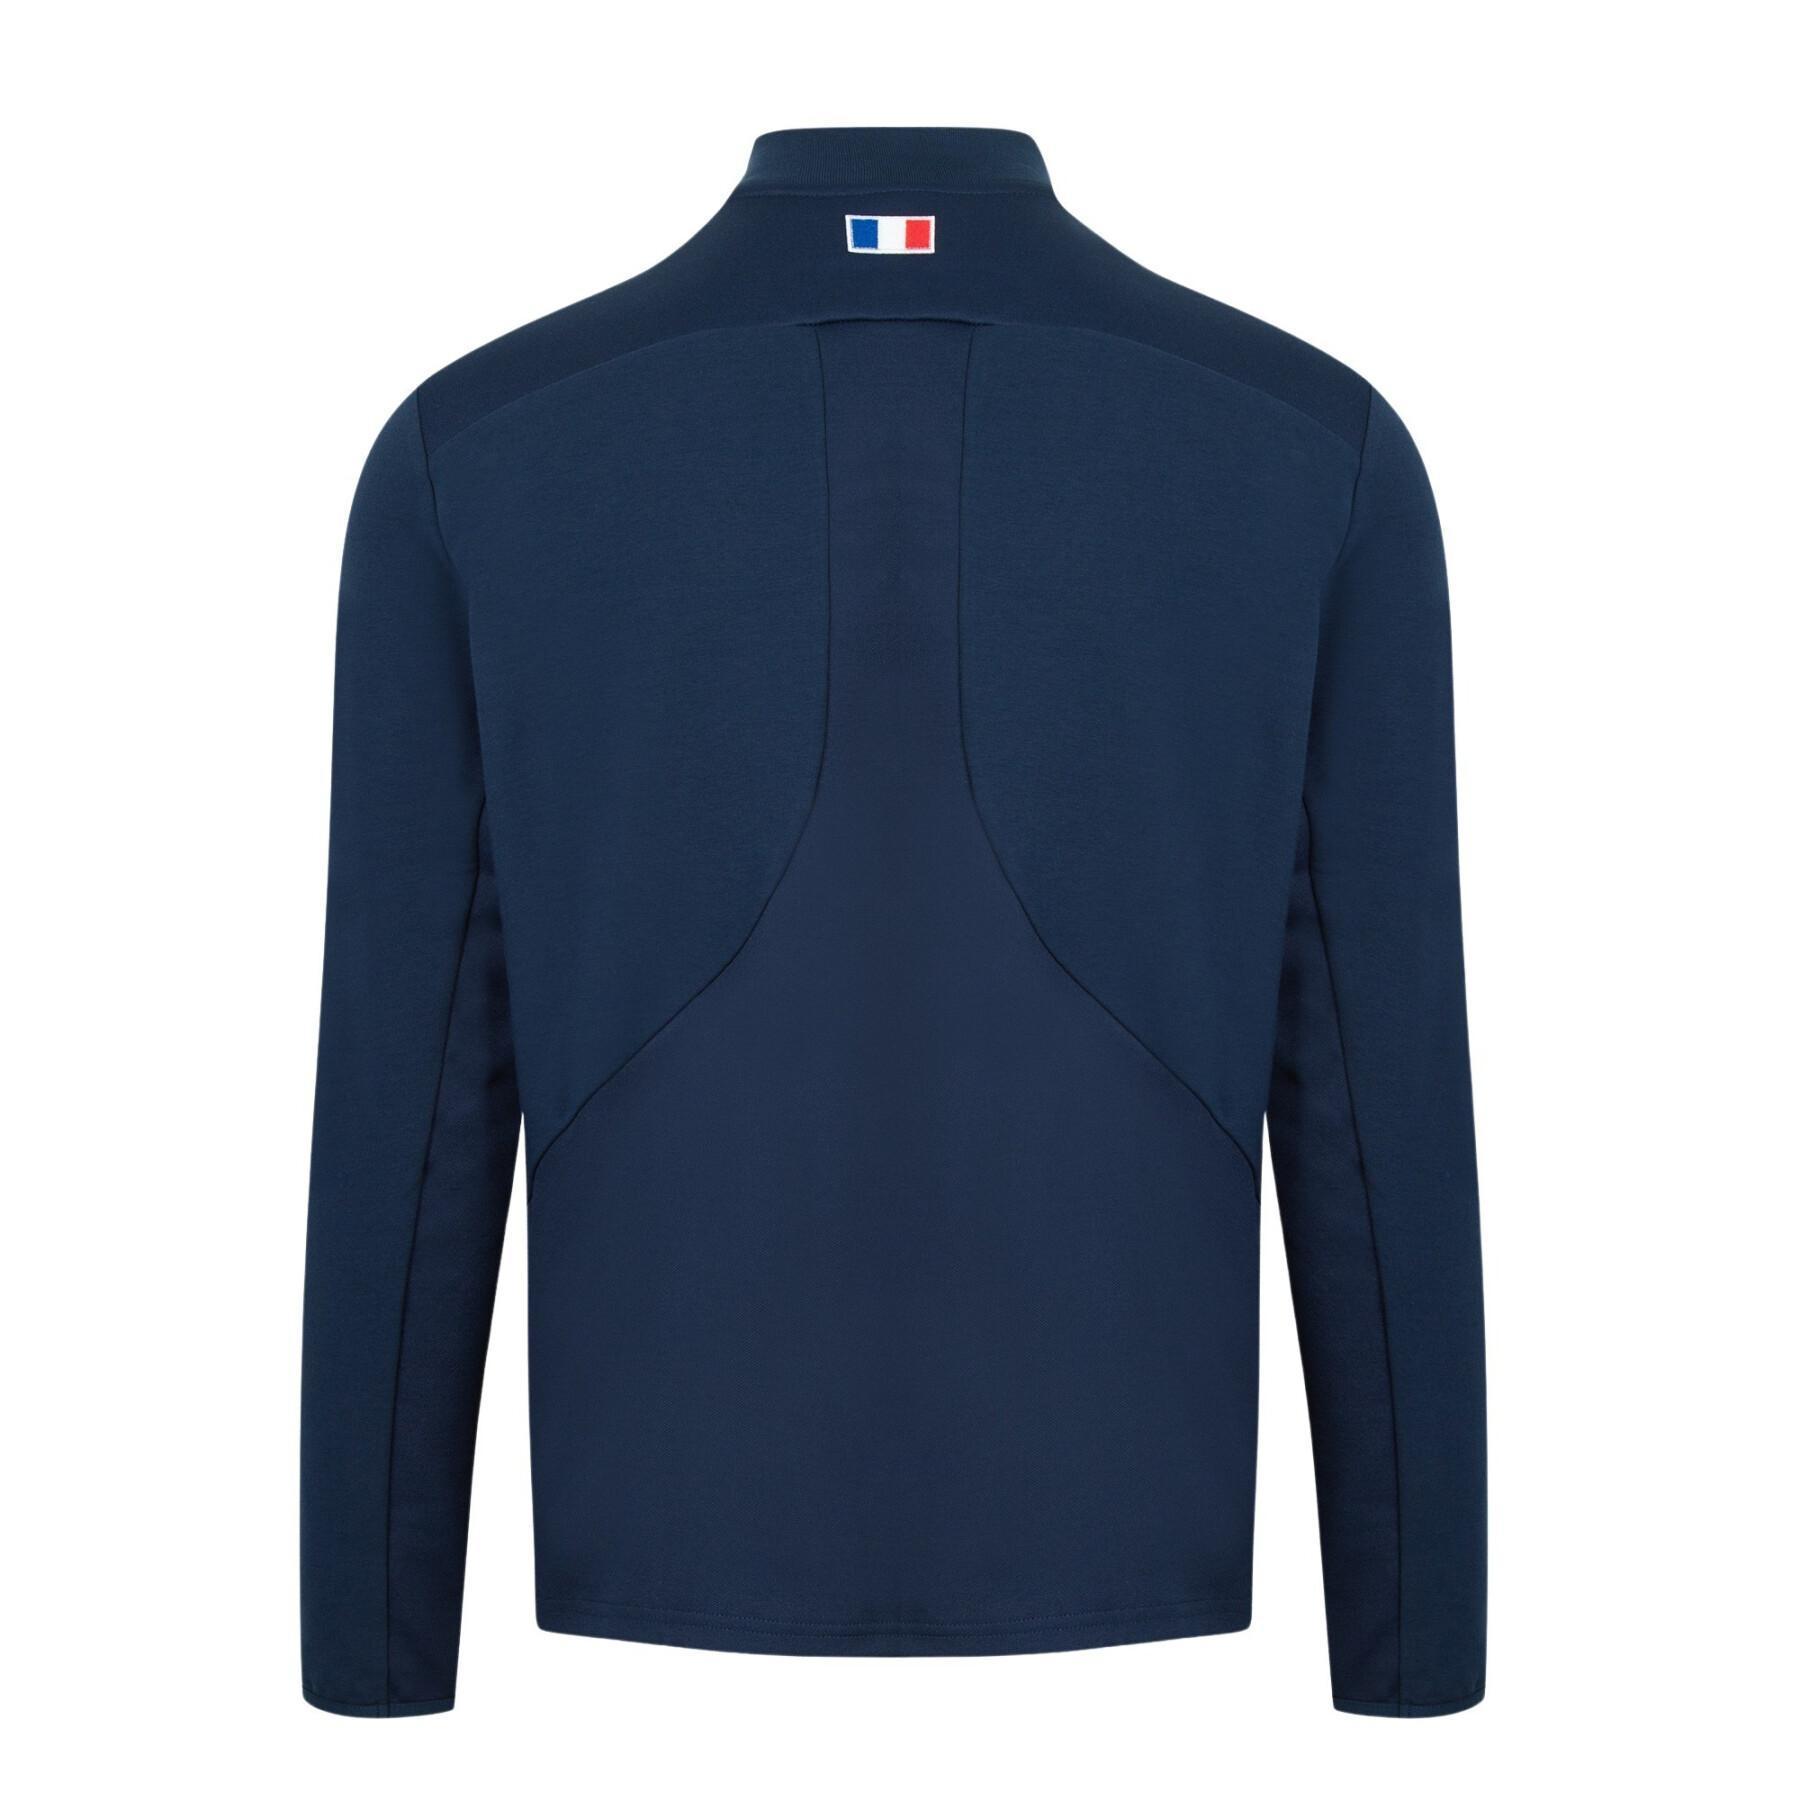 Sweat 1/2 zip xv from France 2021/22